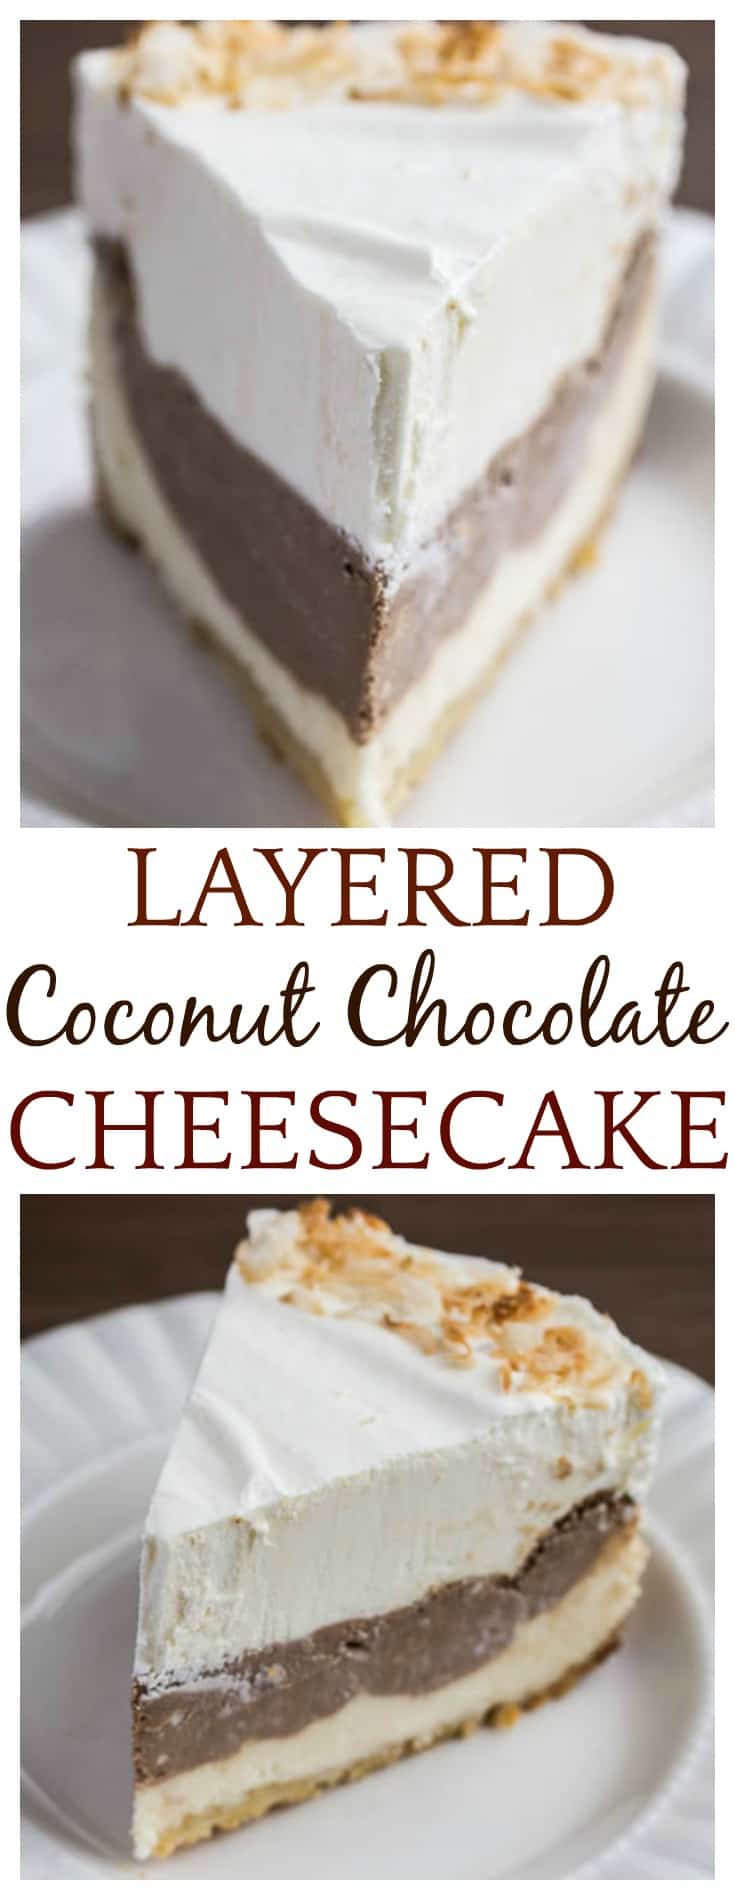 This Layered Coconut Chocolate Cheesecake is super indulgent, and easier to make than you might think! One layer is a really flavorful coconut cheesecake, while the other is a sweet, rich chocolate cheesecake! The final layer is sweet homemade whipped cream! This is a surprisingly easy recipe to make! | #cheesecake #coconutcheesecake #chocolatecheesecake #easyrecipes #DLB #dessert